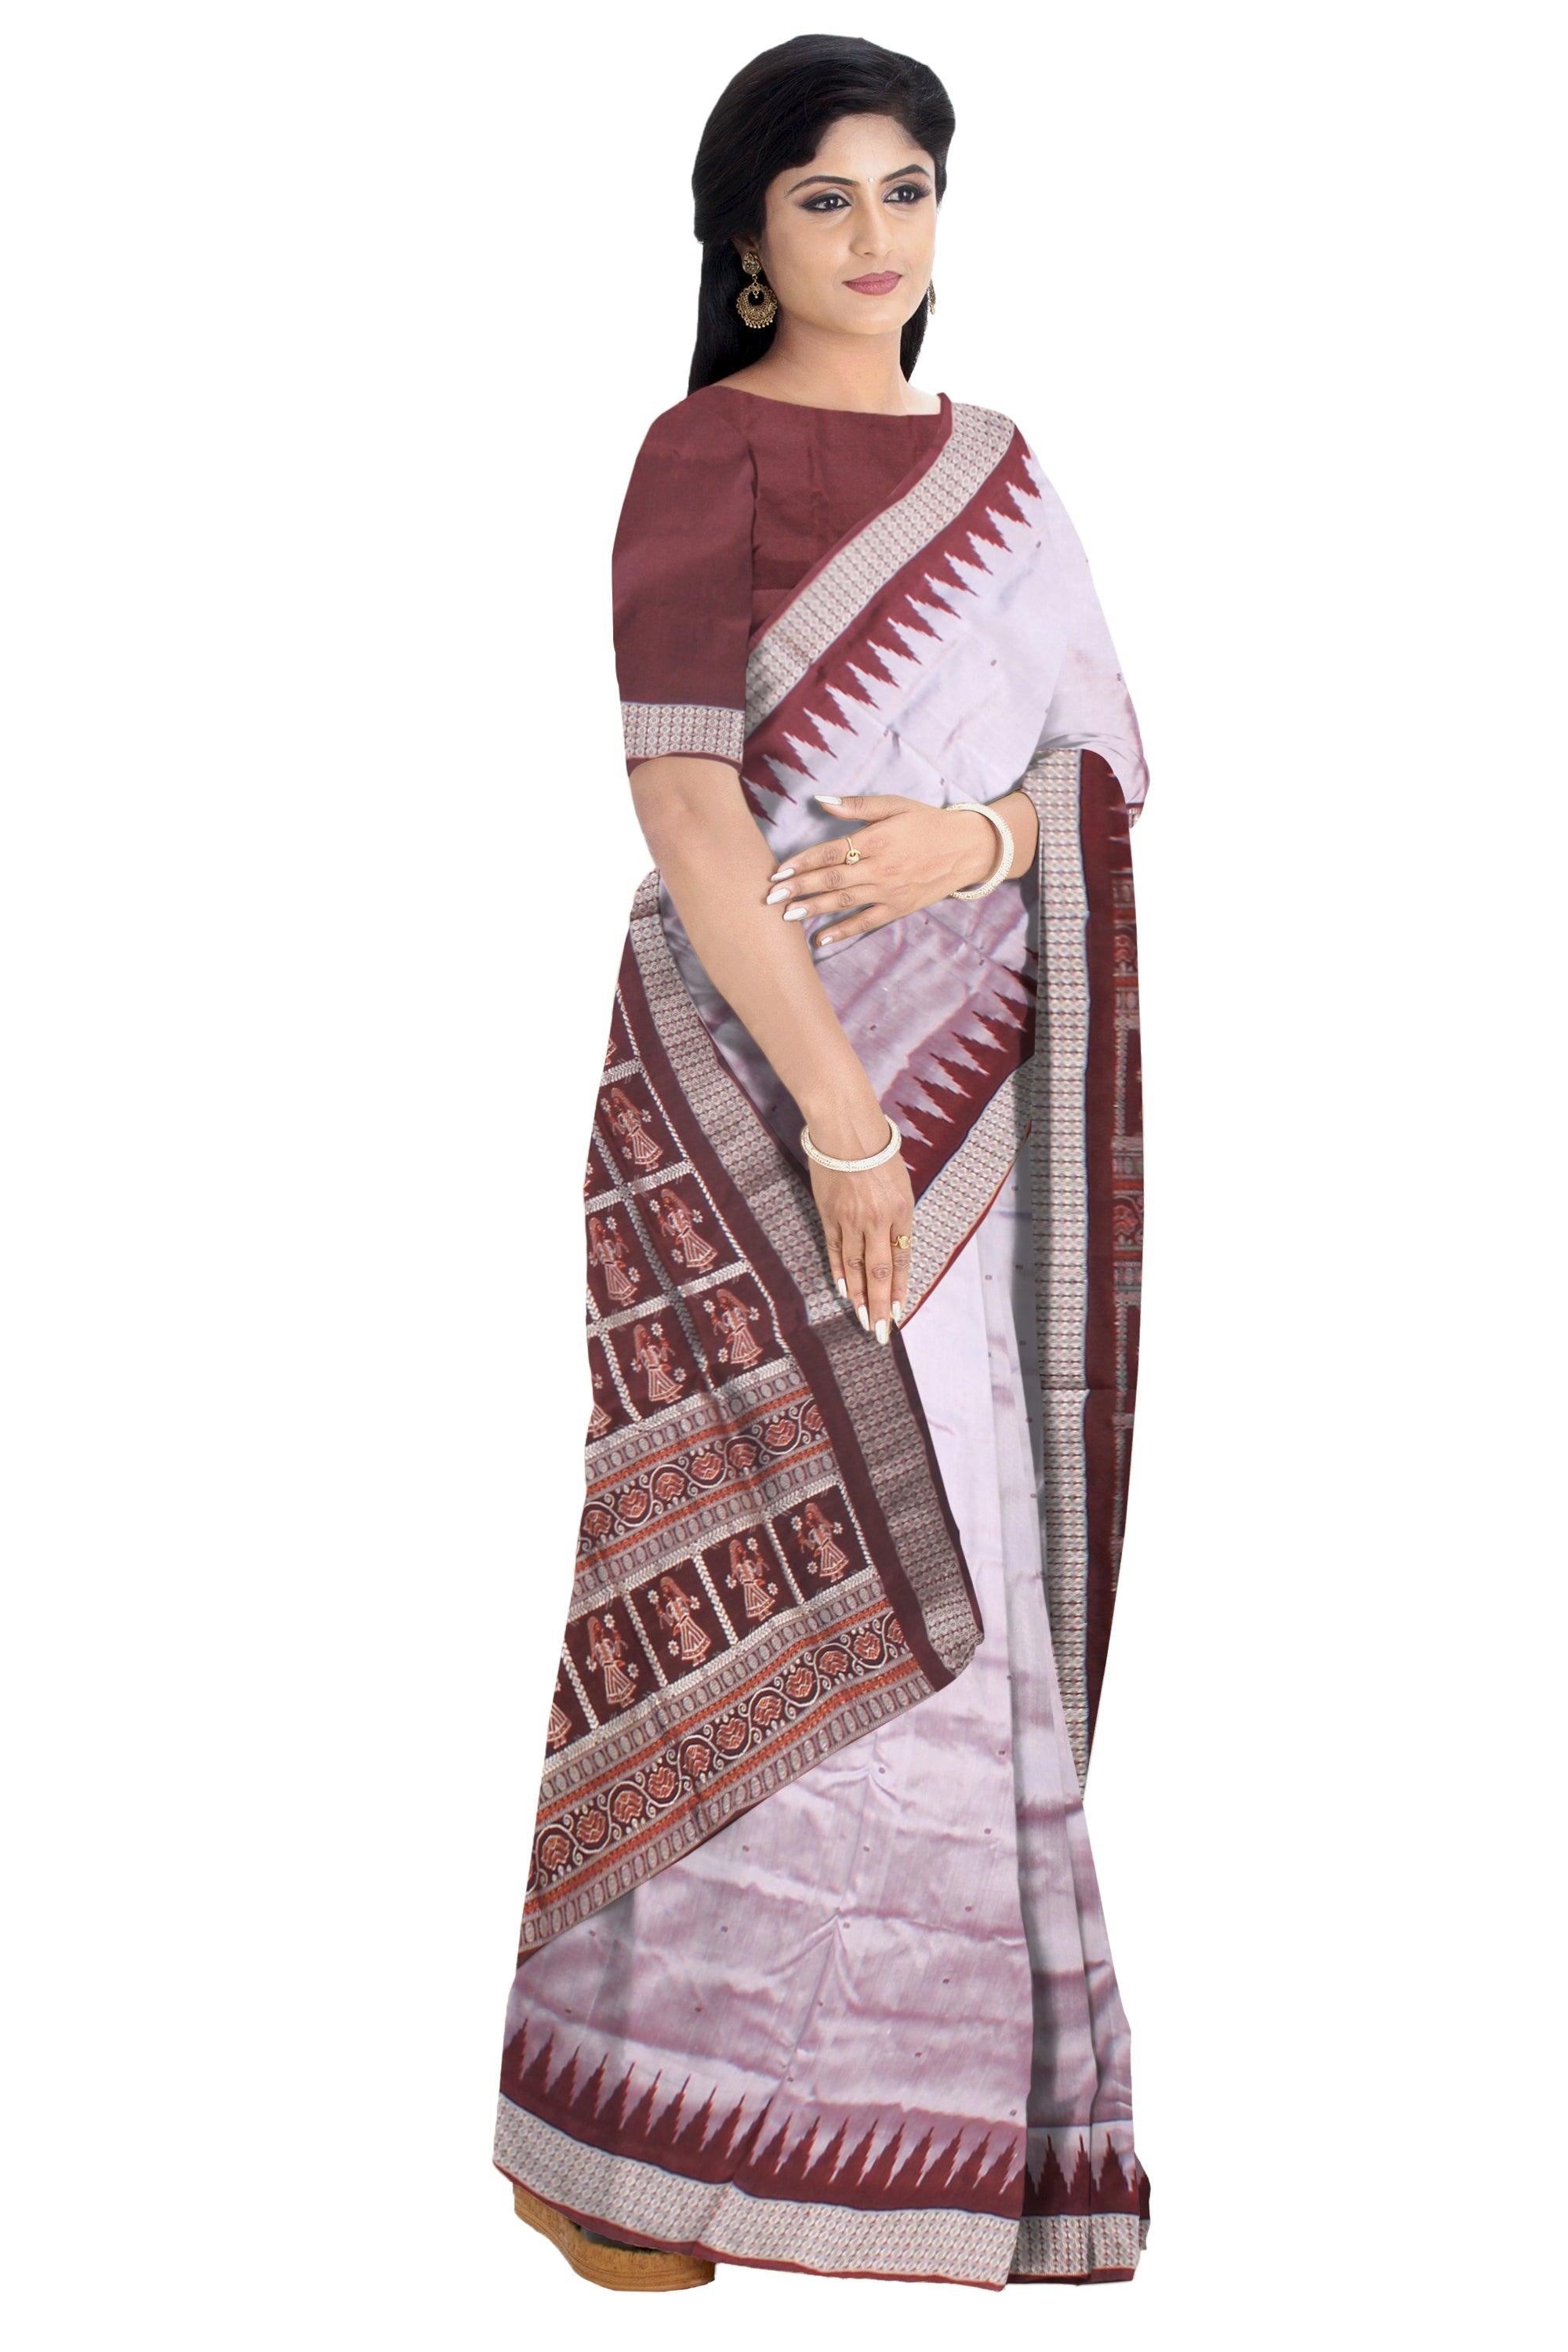 SMALL BOOTY PATTERN PATA SAREE IS SILVER AND COFFEE COLOR BASE, ATTACHED WITH BLOUSE PIECE. - Koshali Arts & Crafts Enterprise